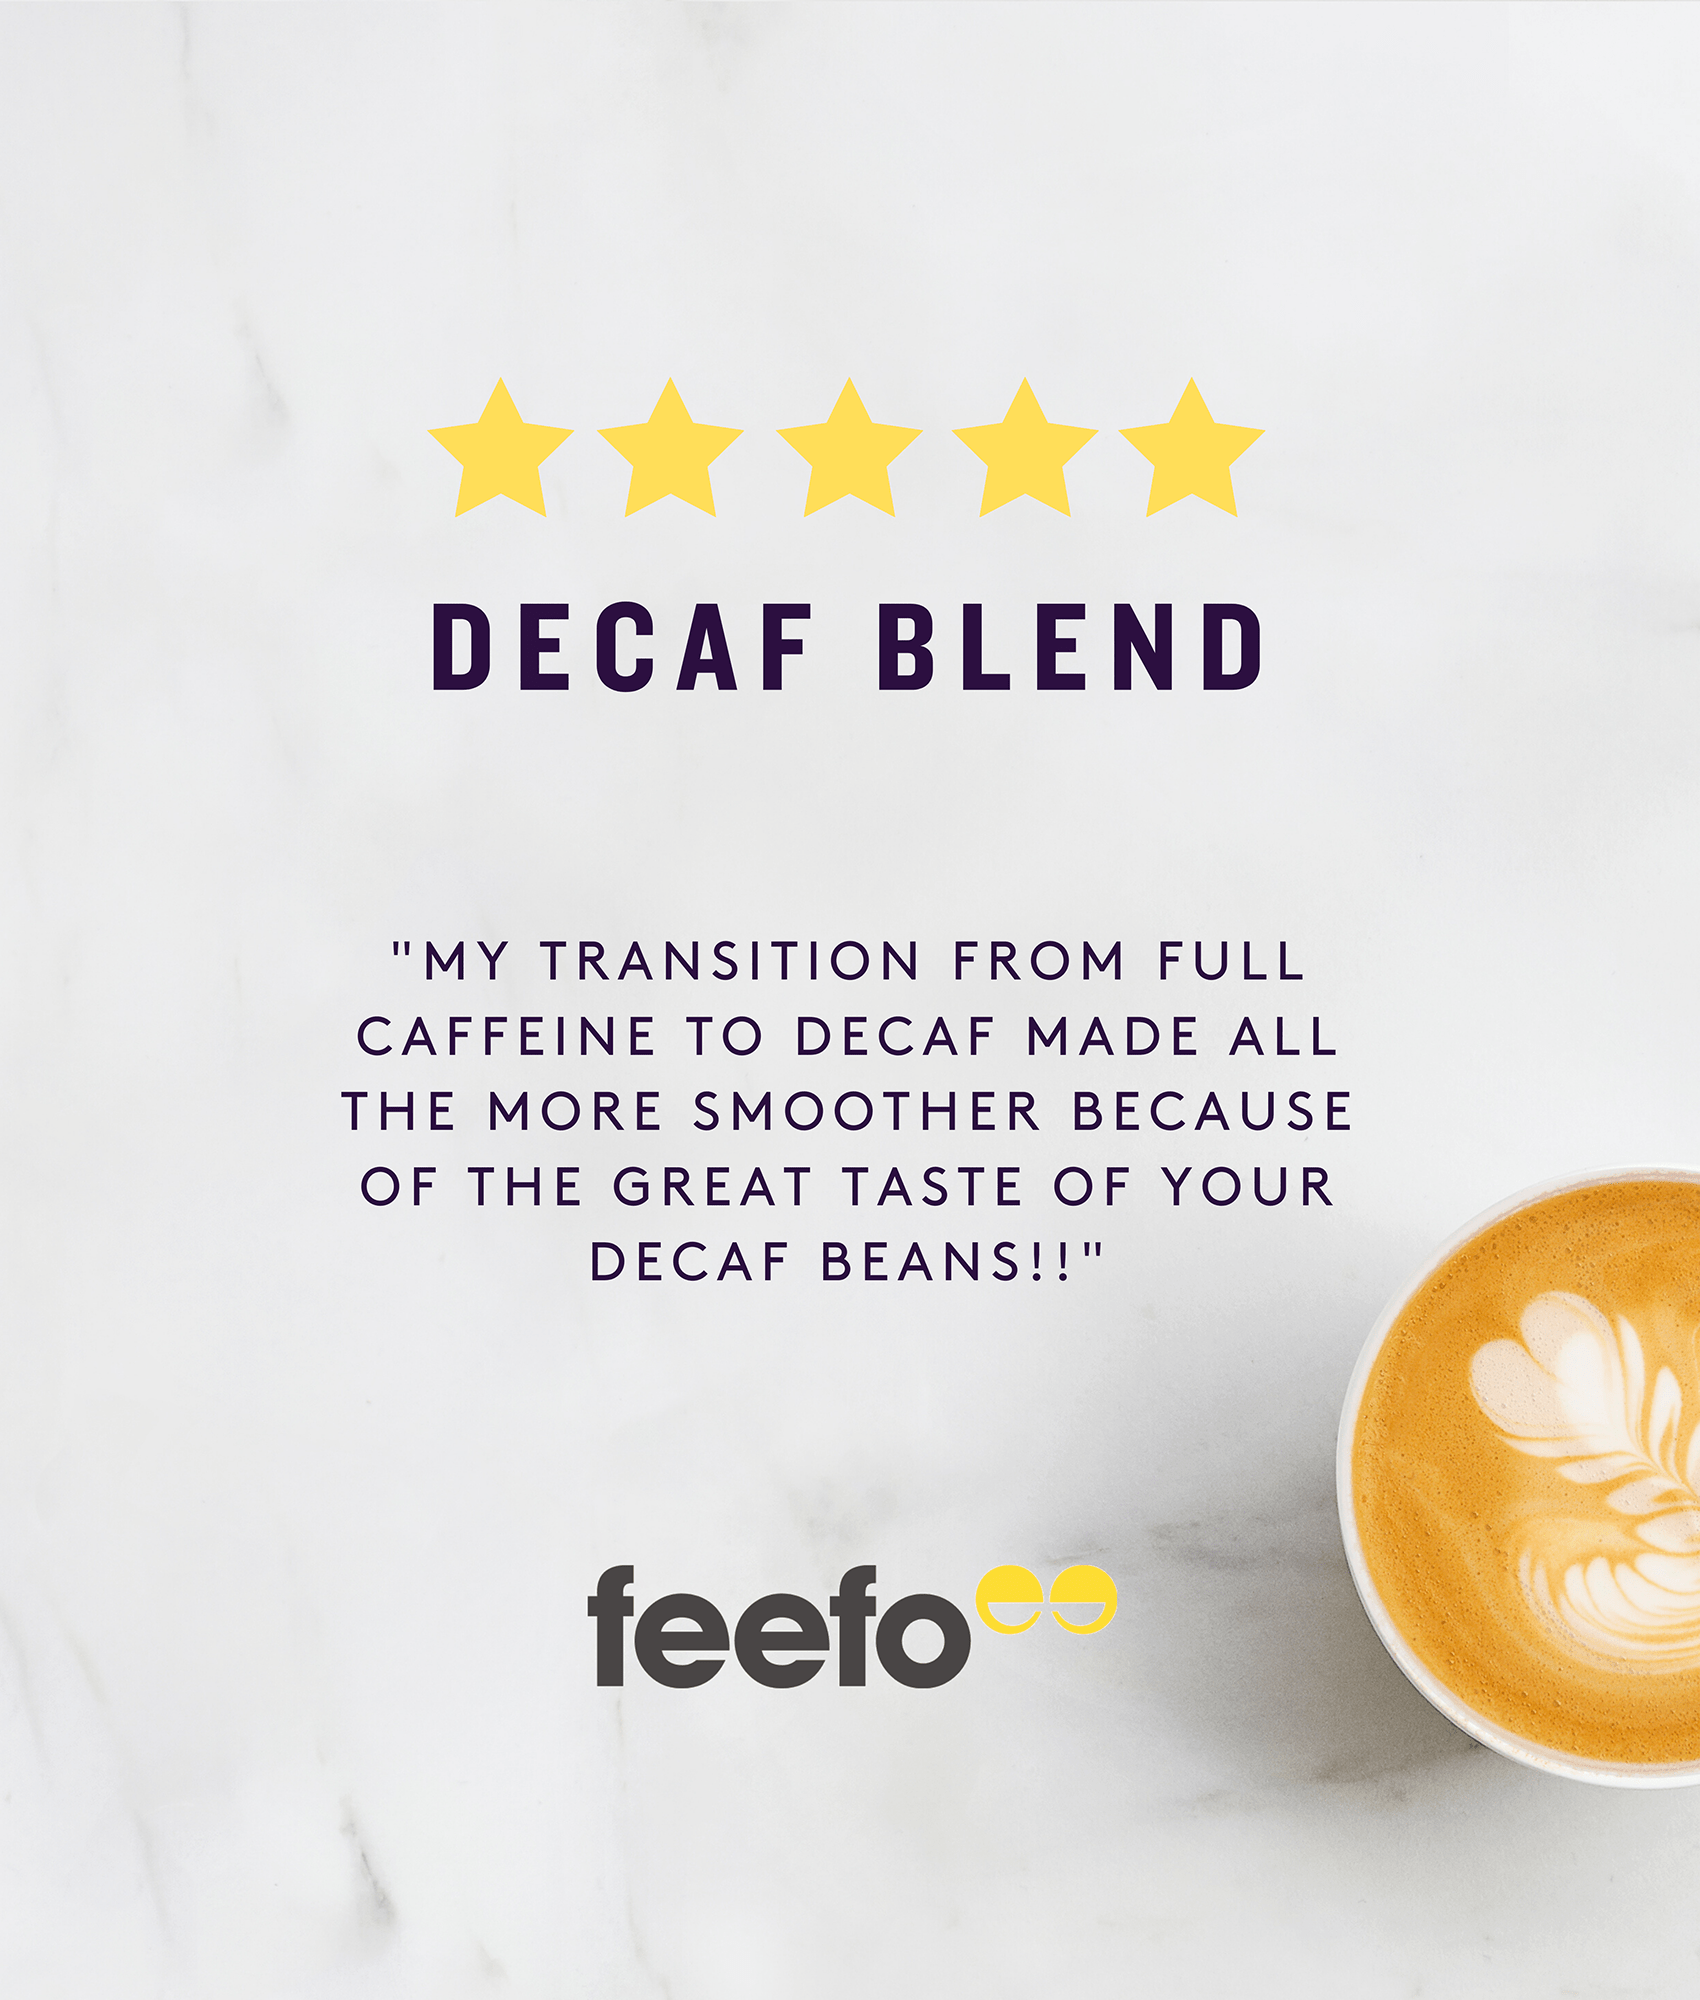 Decaf Blend, 5 star review